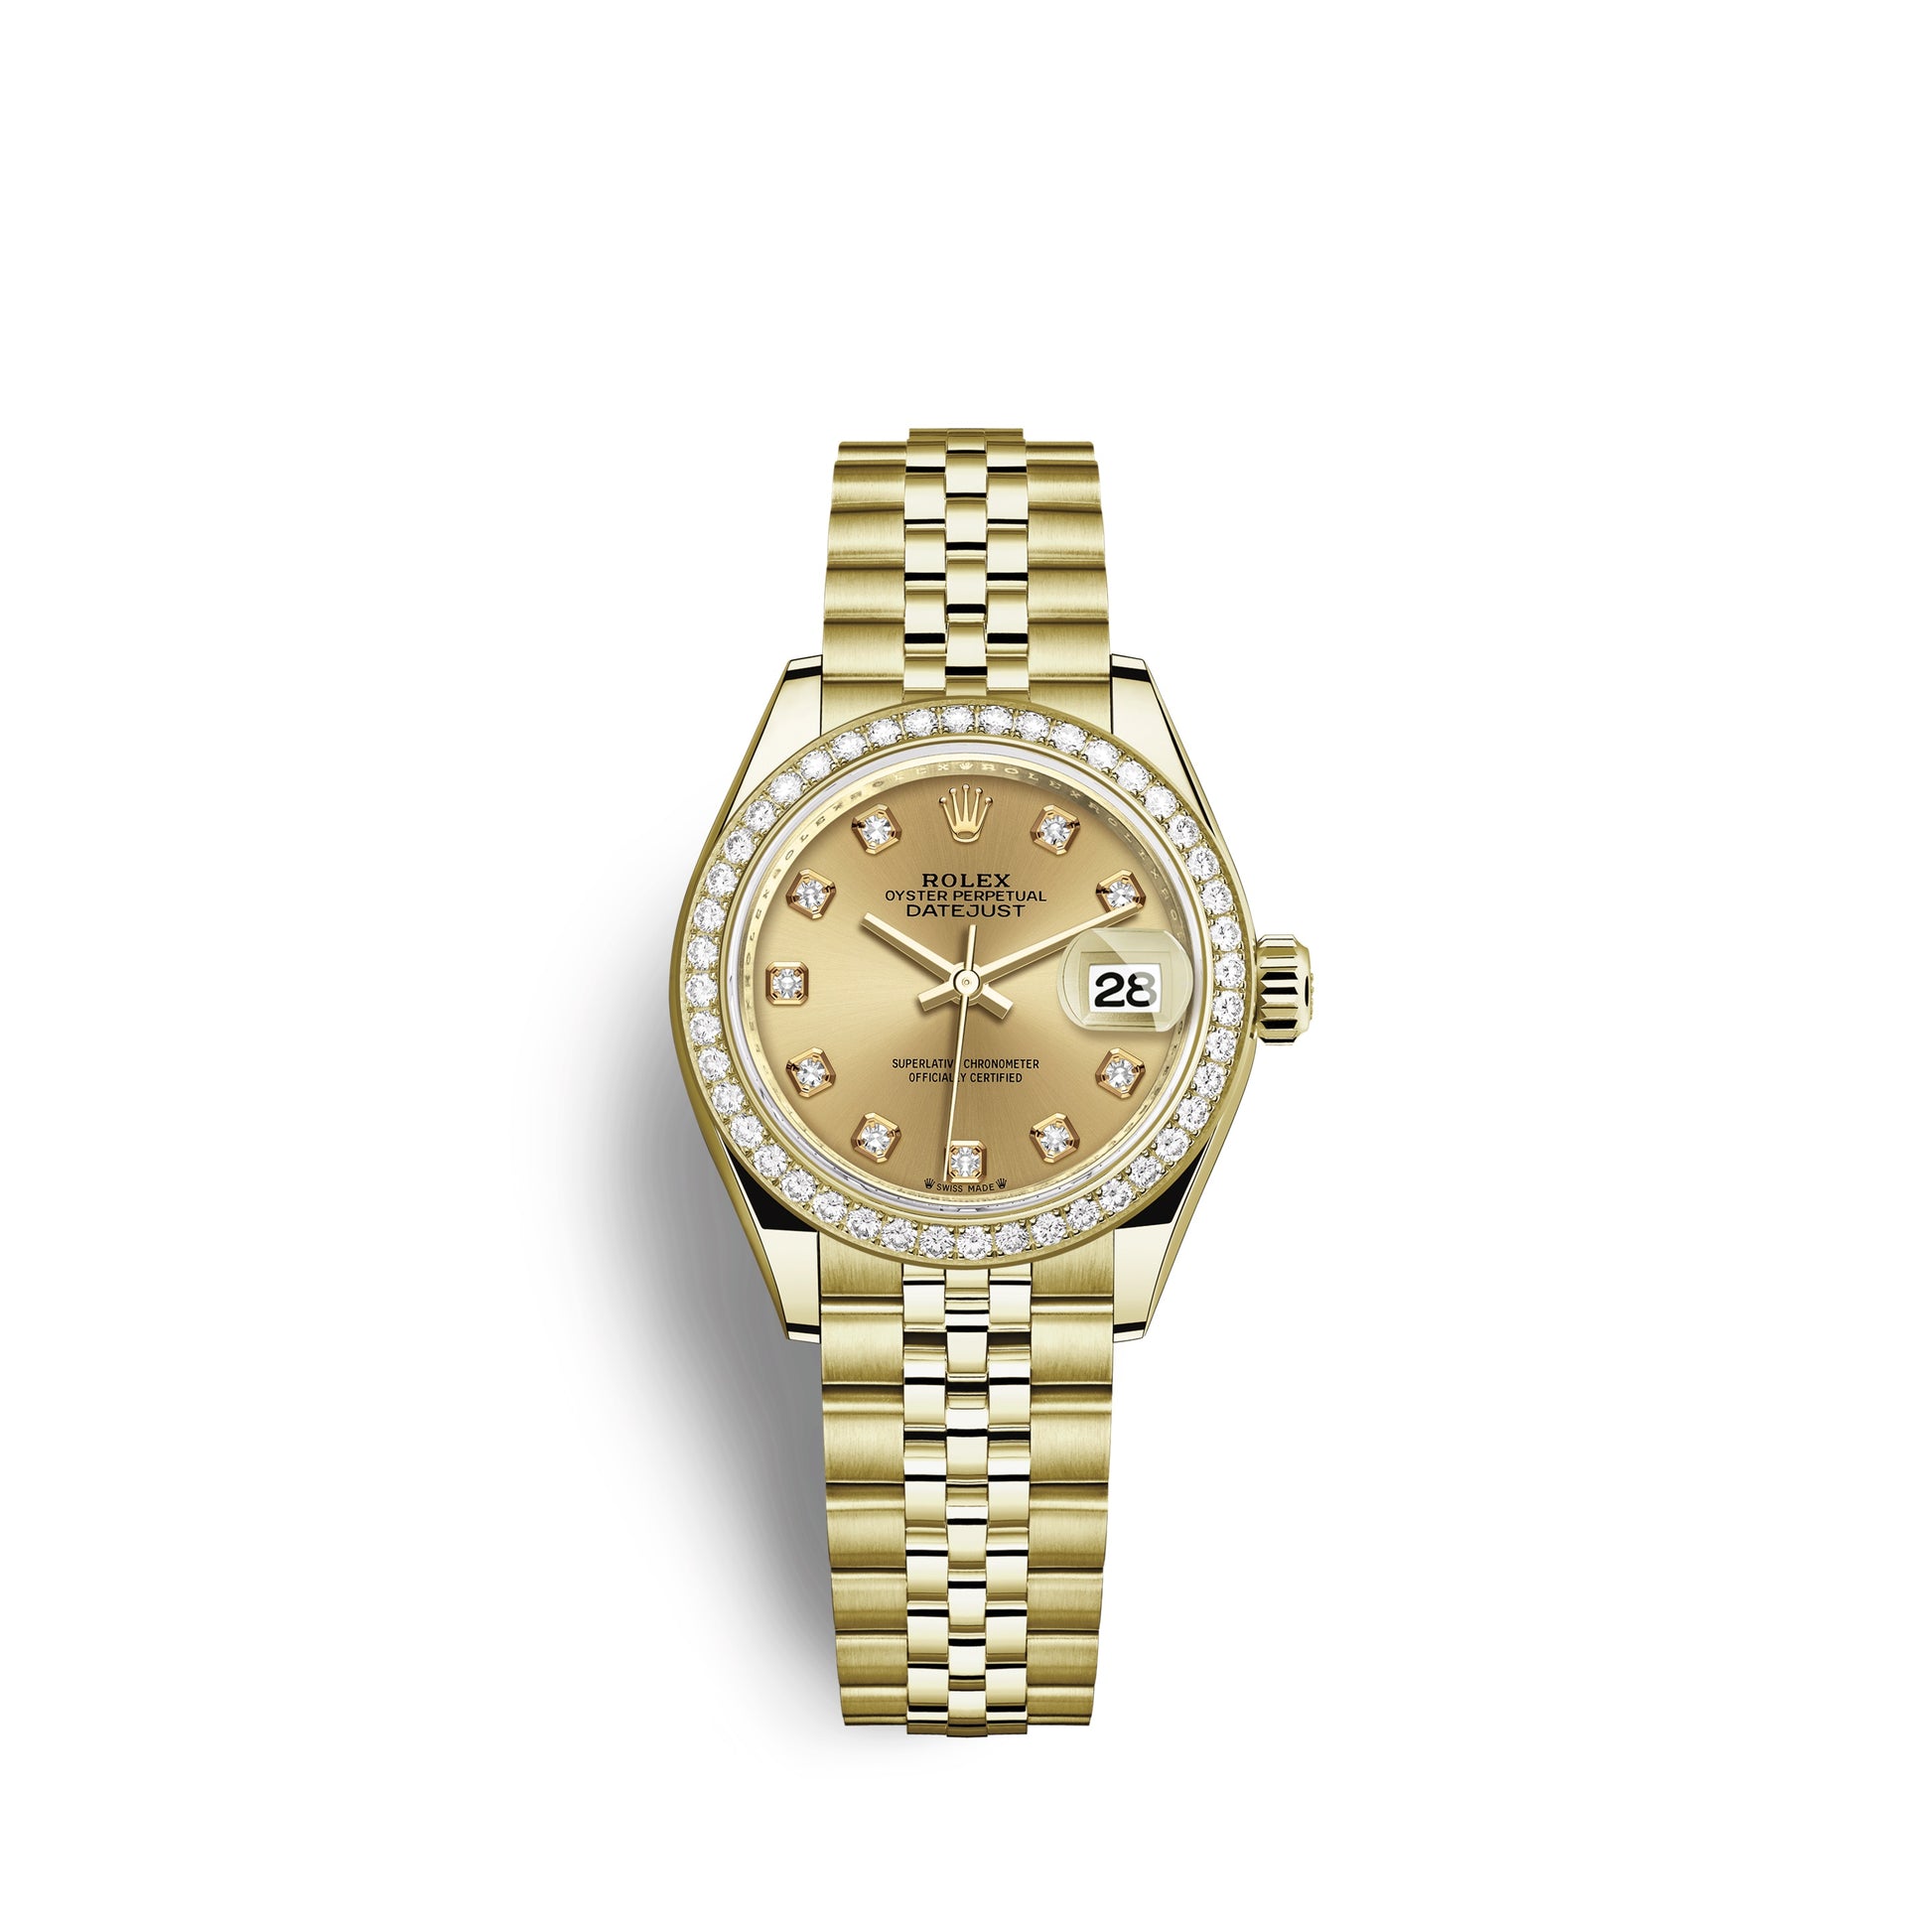 Rolex Lady-Datejust 28, 18kt Yellow Gold and diamonds, Ref# 279138RBR-0024